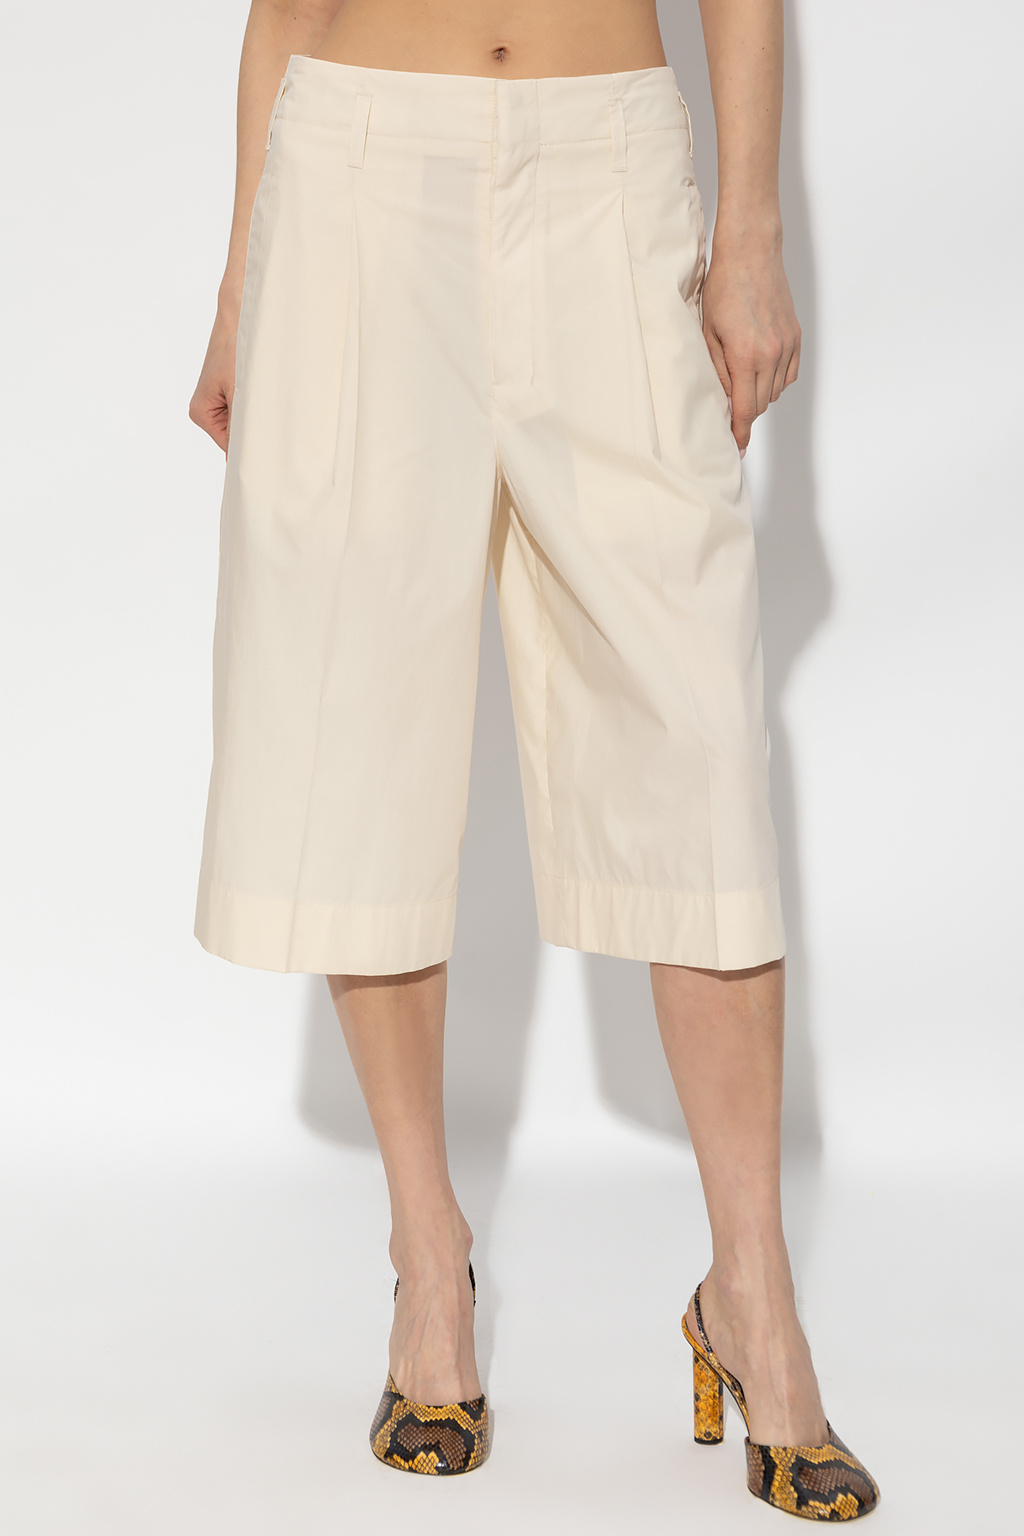 Lemaire High-waisted shorts